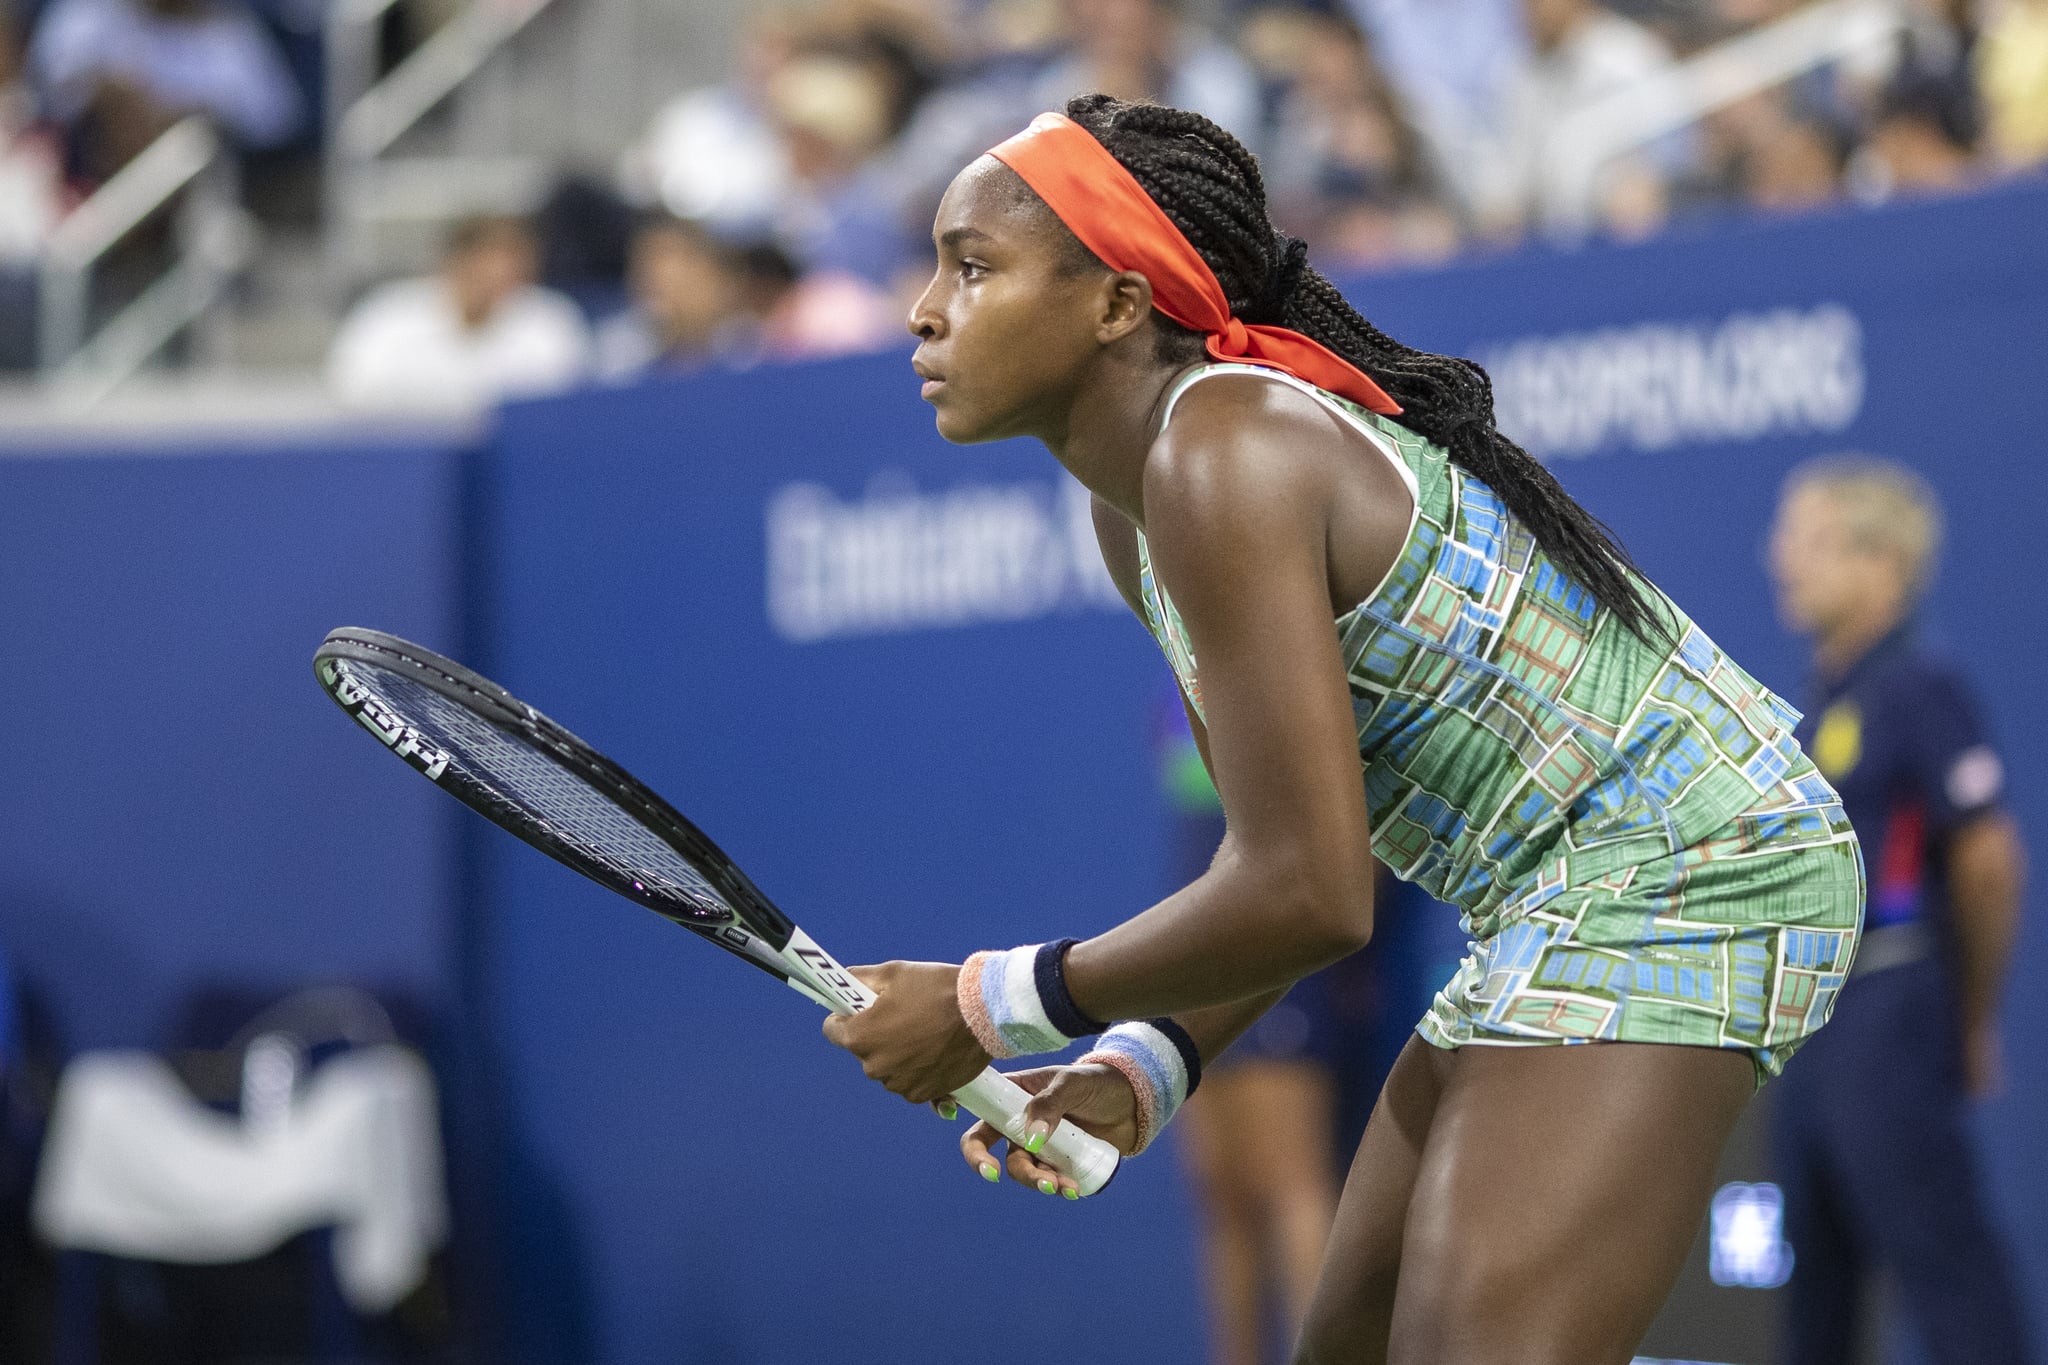 2019 US Open Tennis Tournament- Day Four.  Coco Gauff of the United States in action against Timea Babos of Hungary in the Women's Singles Round Two match on Louis Armstrong Stadium at the 2019 US Open Tennis Tournament at the USTA Billie Jean King National Tennis Center on August 29th, 2019 in Flushing, Queens, New York City.  (Photo by Tim Clayton/Corbis via Getty Images)